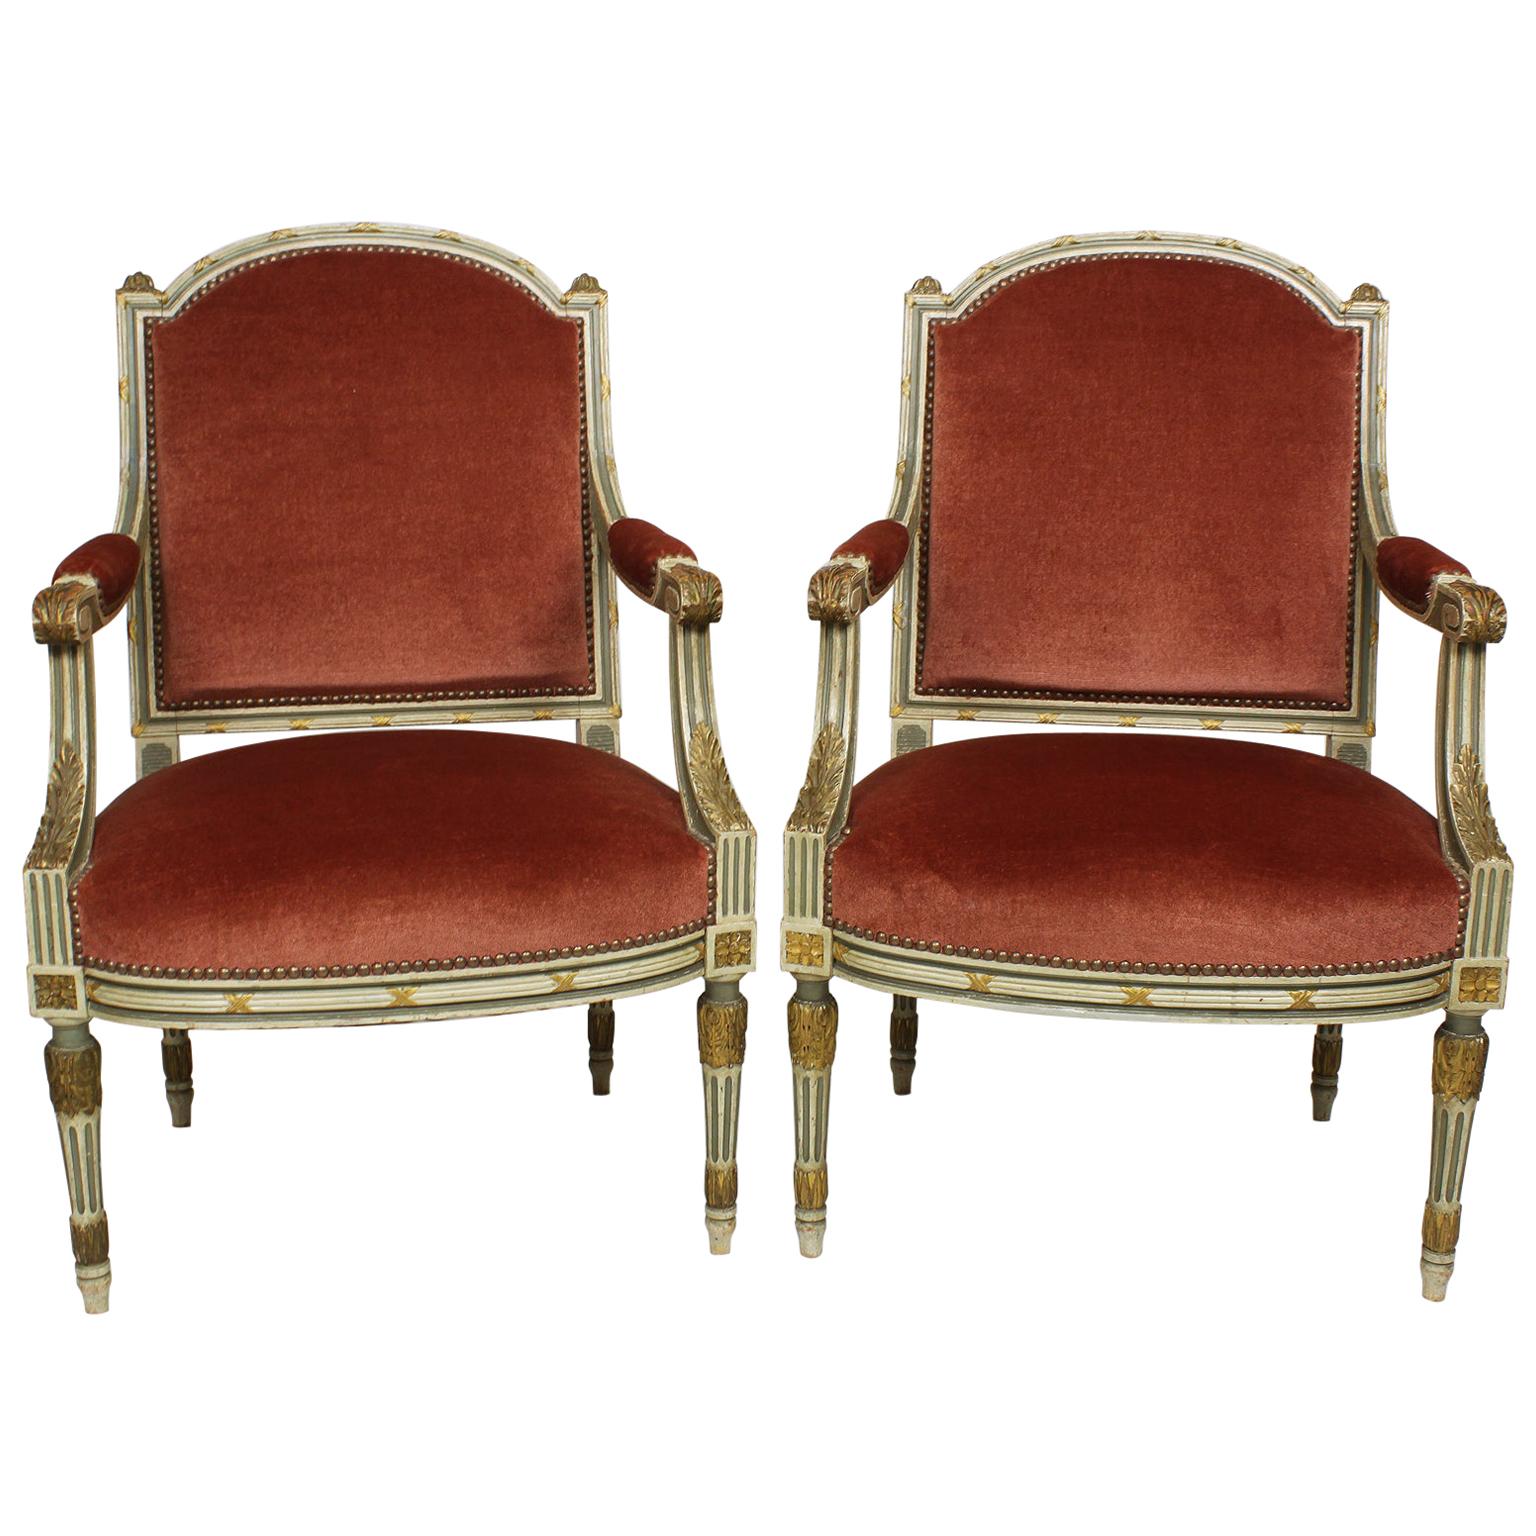 Pair of French Louis XVI Style Gilt, Cream /Green Painted Fauteuils Armchairs